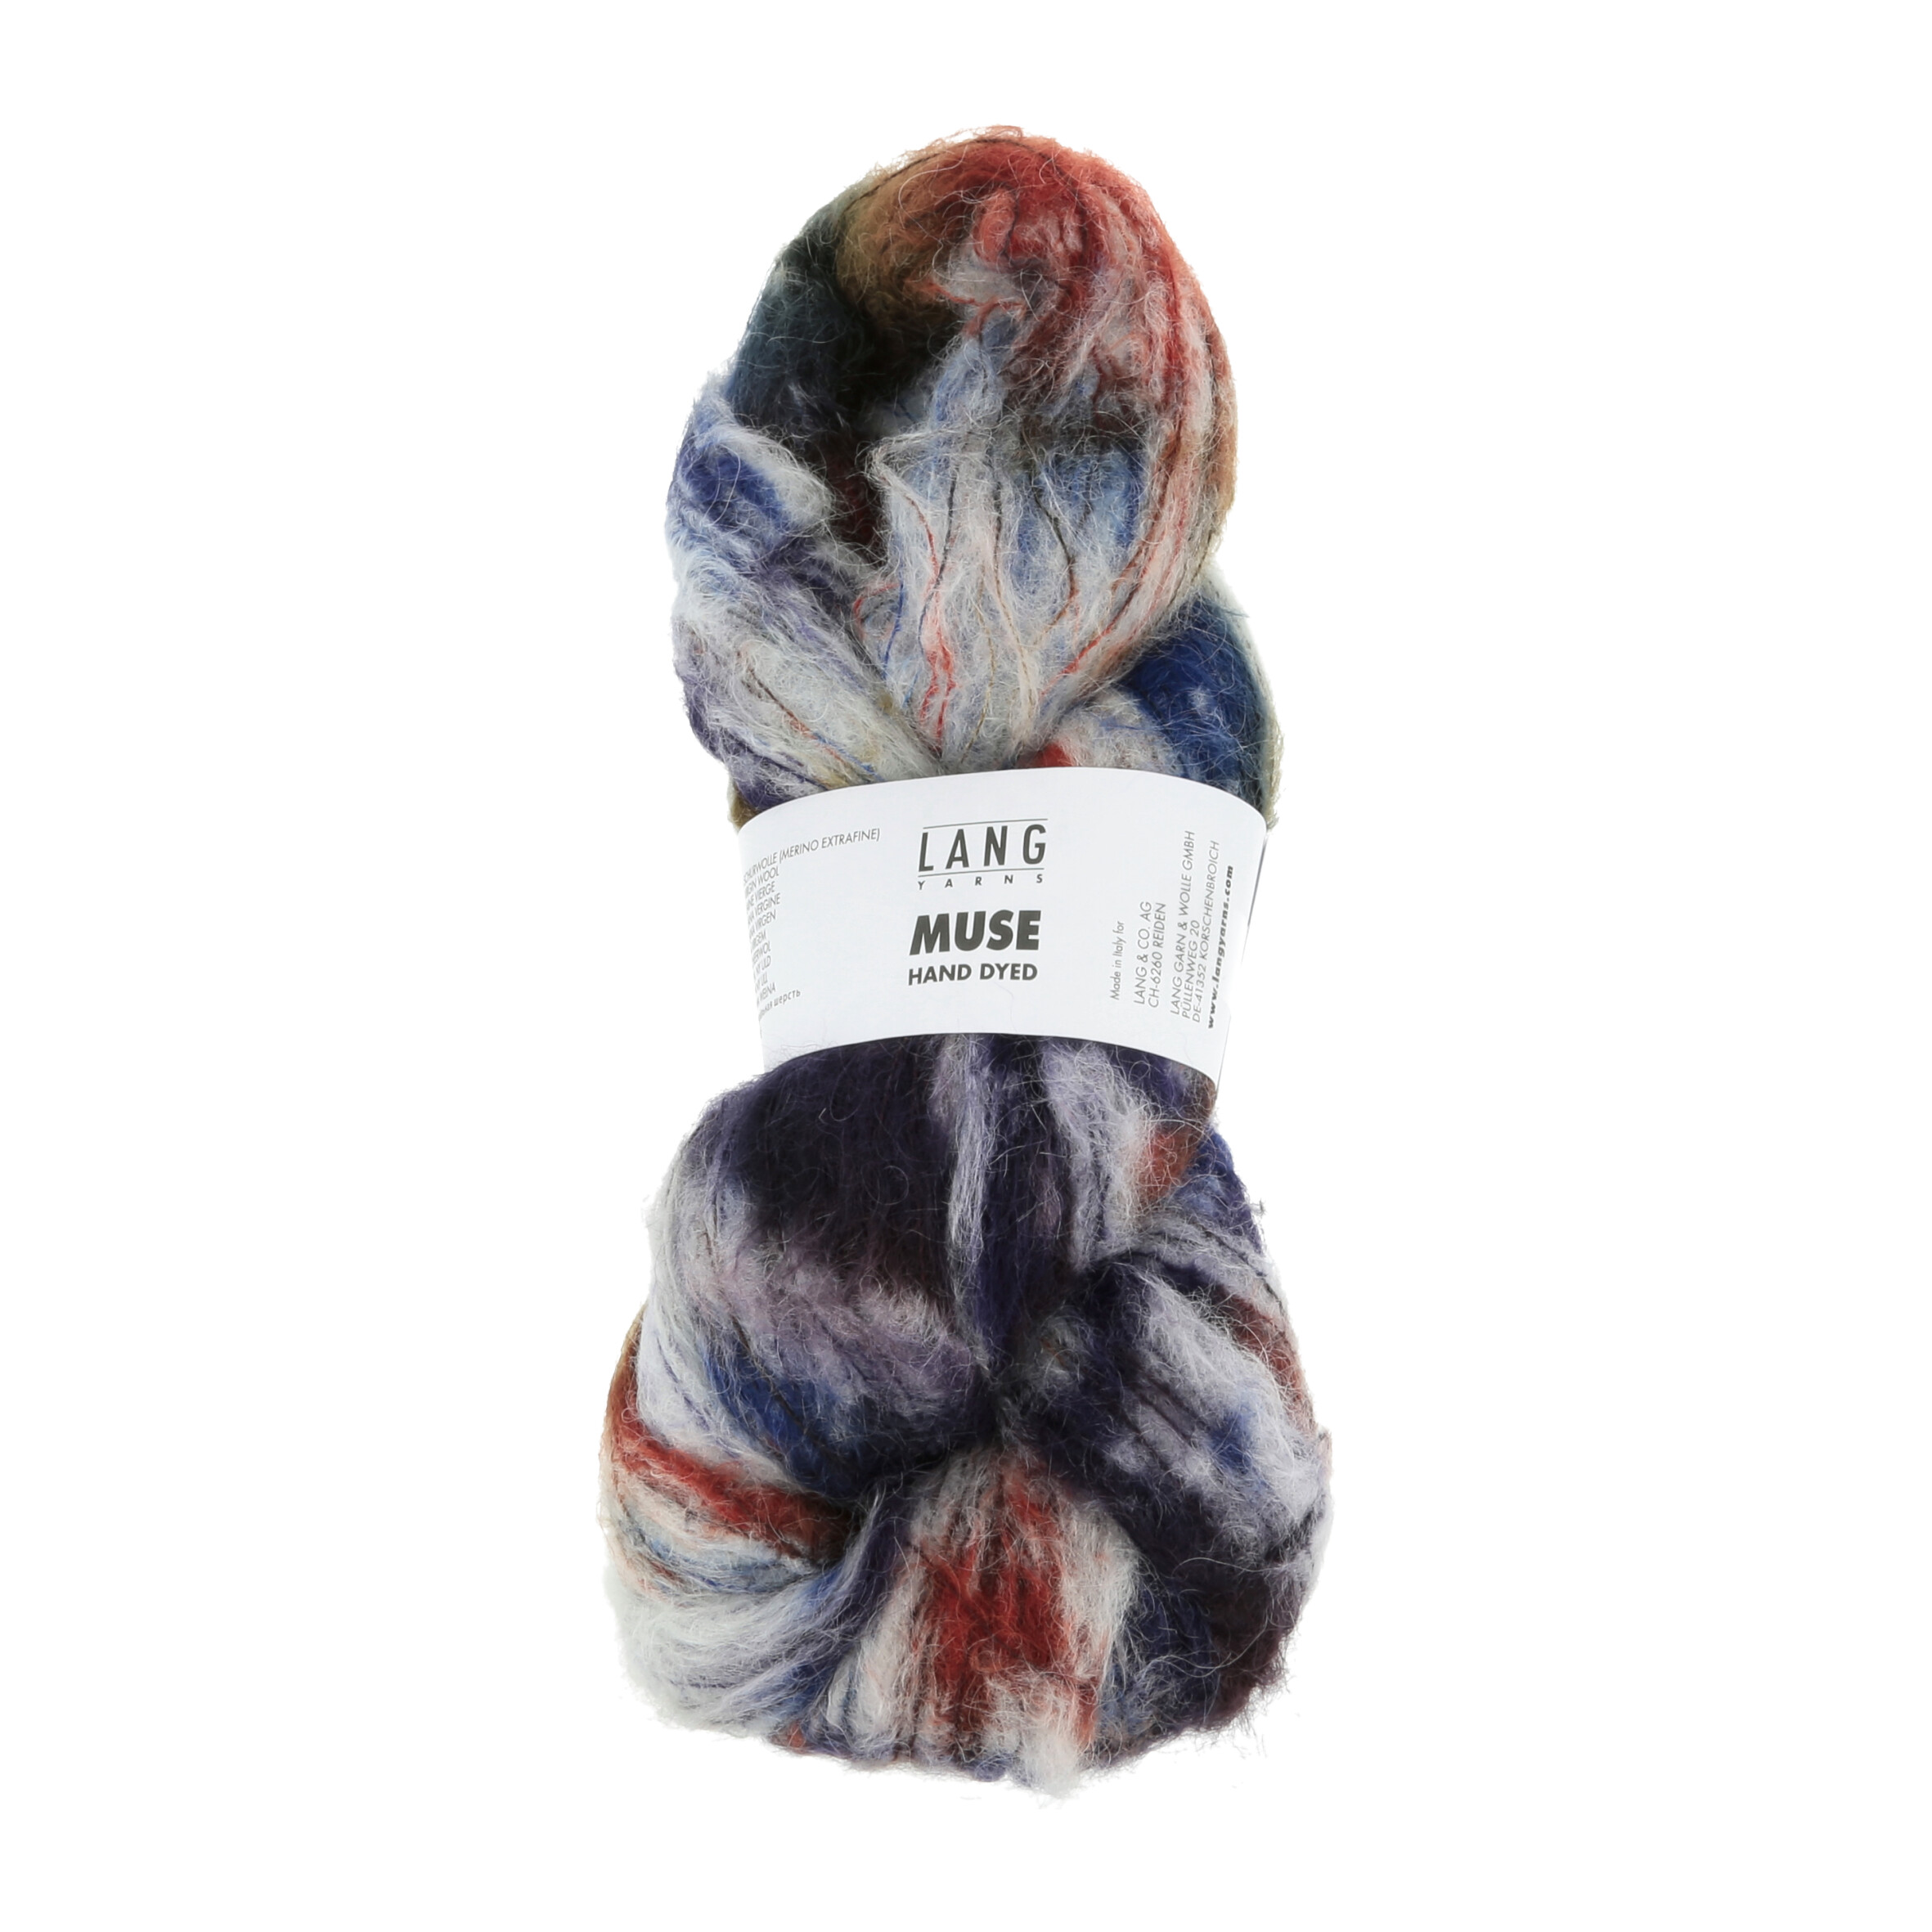 LANG MUSE (HAND DYED) 100GR